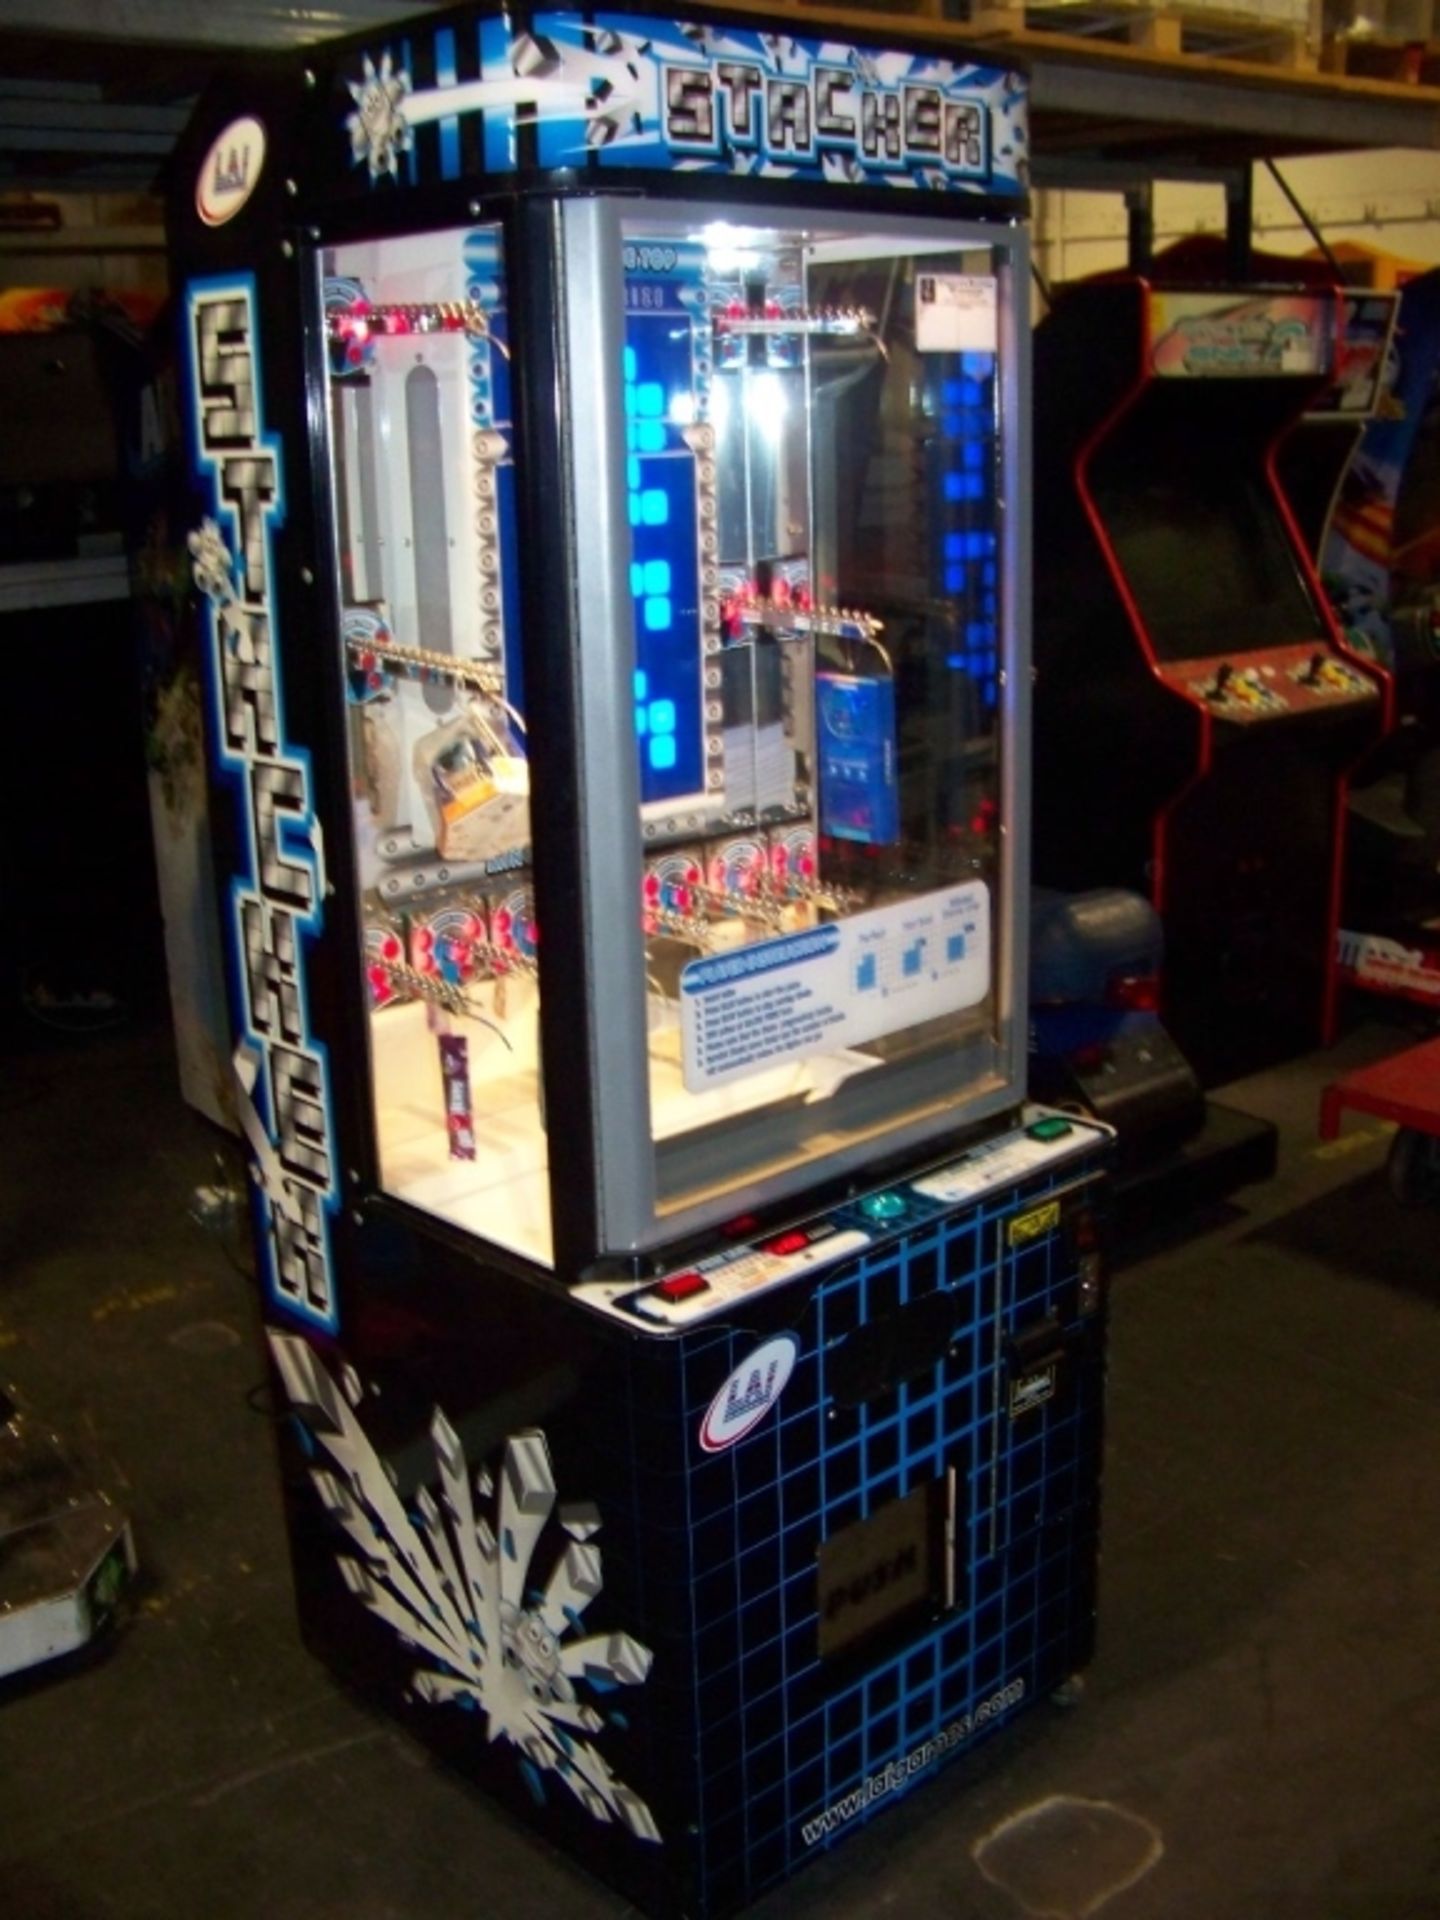 STACKER CLUB BLUE PRIZE REDEMPTION GAME LAI GAMES Item is in used condition. Evidence of wear and